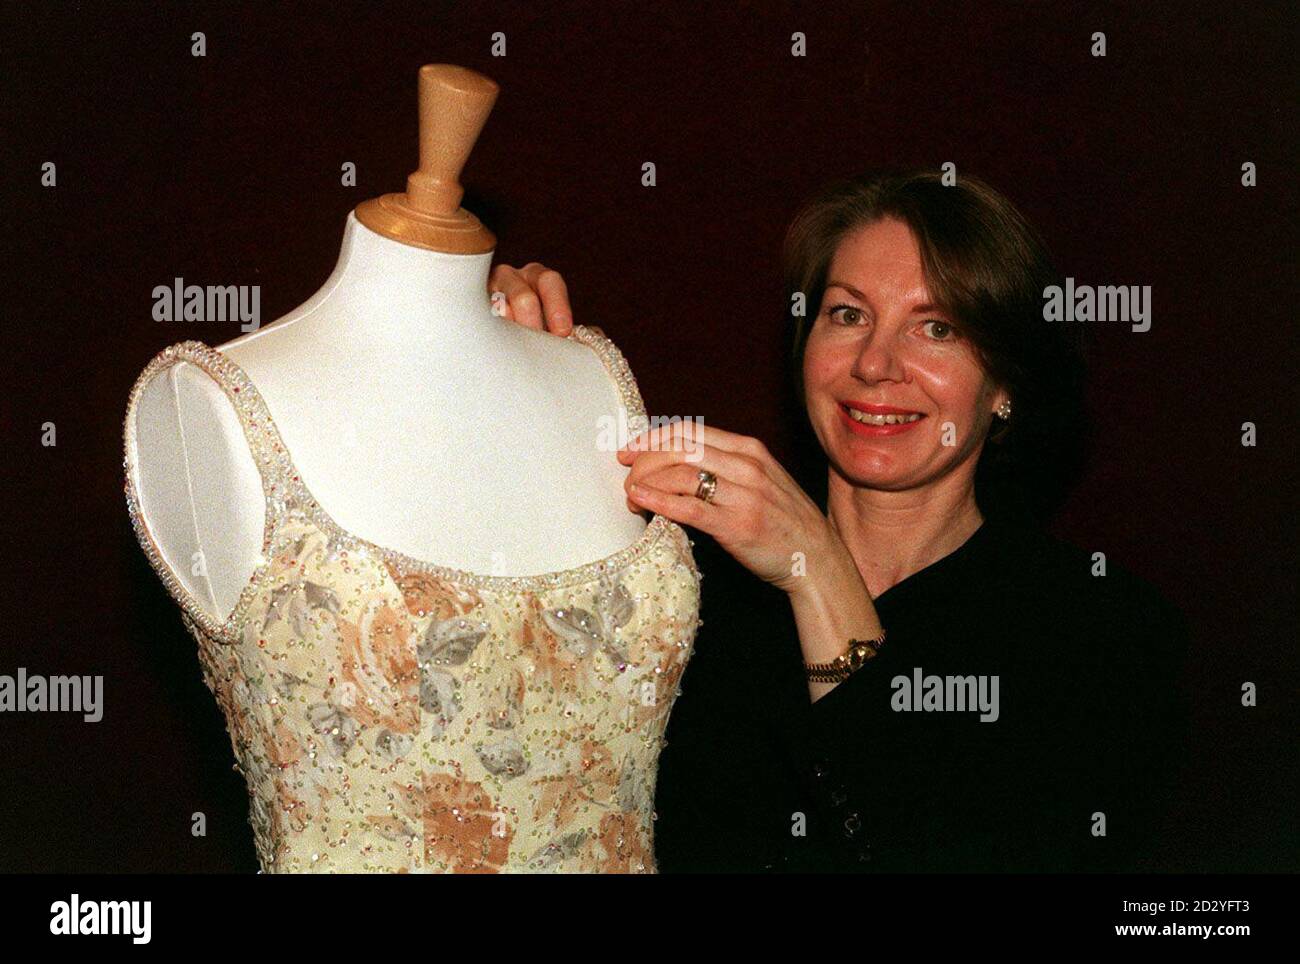 PA NEWS PHOTO 16/3/98 Susan Martin, organiser of the unique charity event Diana, Princess Of Wales - A Tribute in Dress, which will benefit The Diana, Princess Of Wales Memorial Fund and The Midlands Centre for Spinal Injuries. The event will feature an exhibition containing dresses worn by the Princess and a gala fashion show featuring spring and summer collections from leading British designers. A host of leading dress designers, including Catherine Walker, Elizabeth and David Emanuel and Bruce Oldfield, are supporting the tribute which will take place on Friday May 29 in Oswestry, Stock Photo